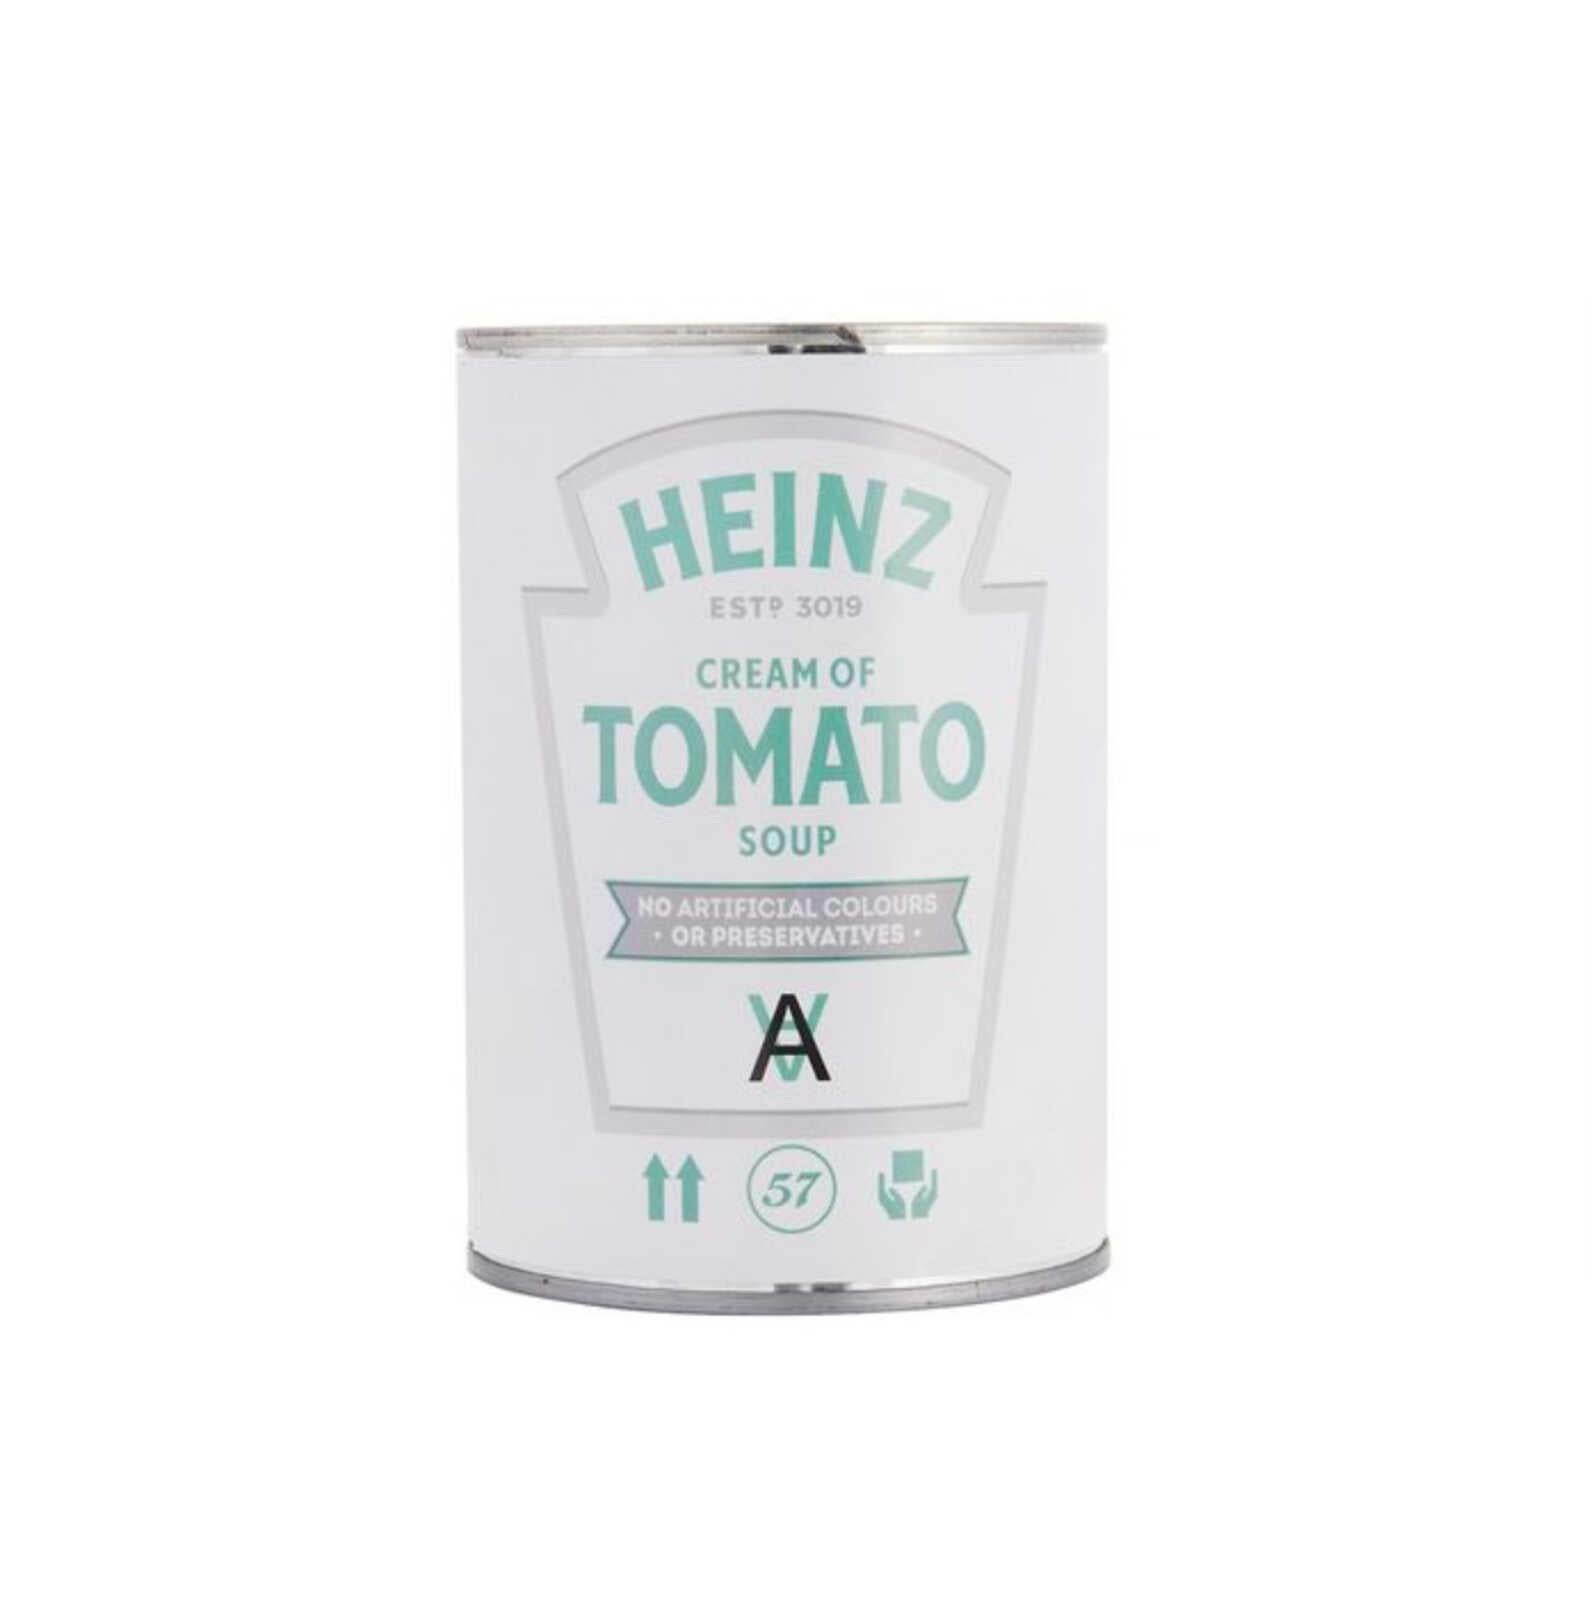 Daniel Arsham Heinz Tomato Soup Selfridges Exclusive 2019. Ltd edition of 3,000


Excellent Condition, some slight marks to paper. Hard to come by in this condition.

4 1/4 × 3 × 3 in  10.8 × 7.6 × 7.6 cm